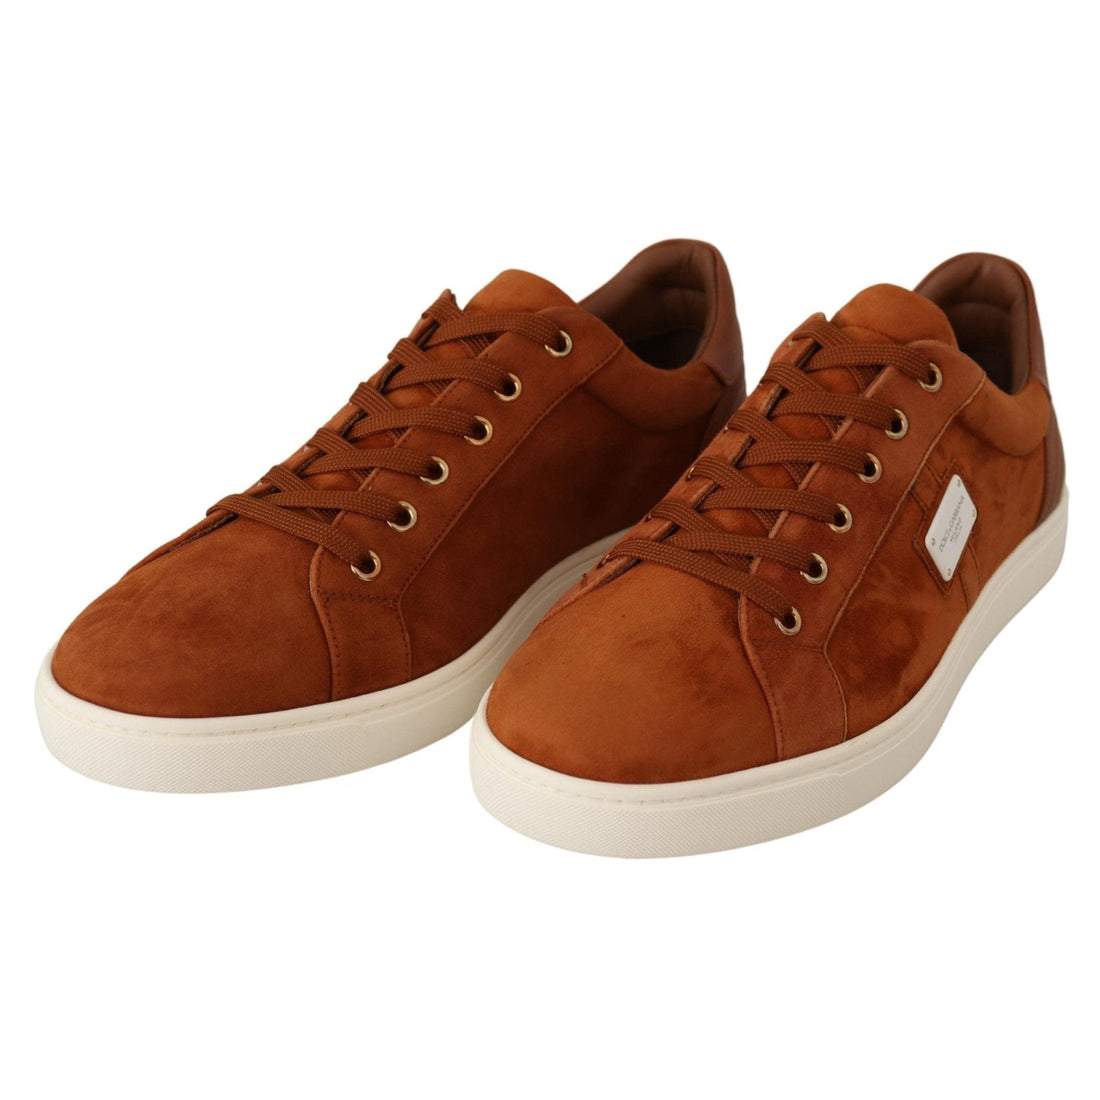 Dolce & Gabbana Light Brown Suede Leather Low Tops Sneakers - Paris Deluxe